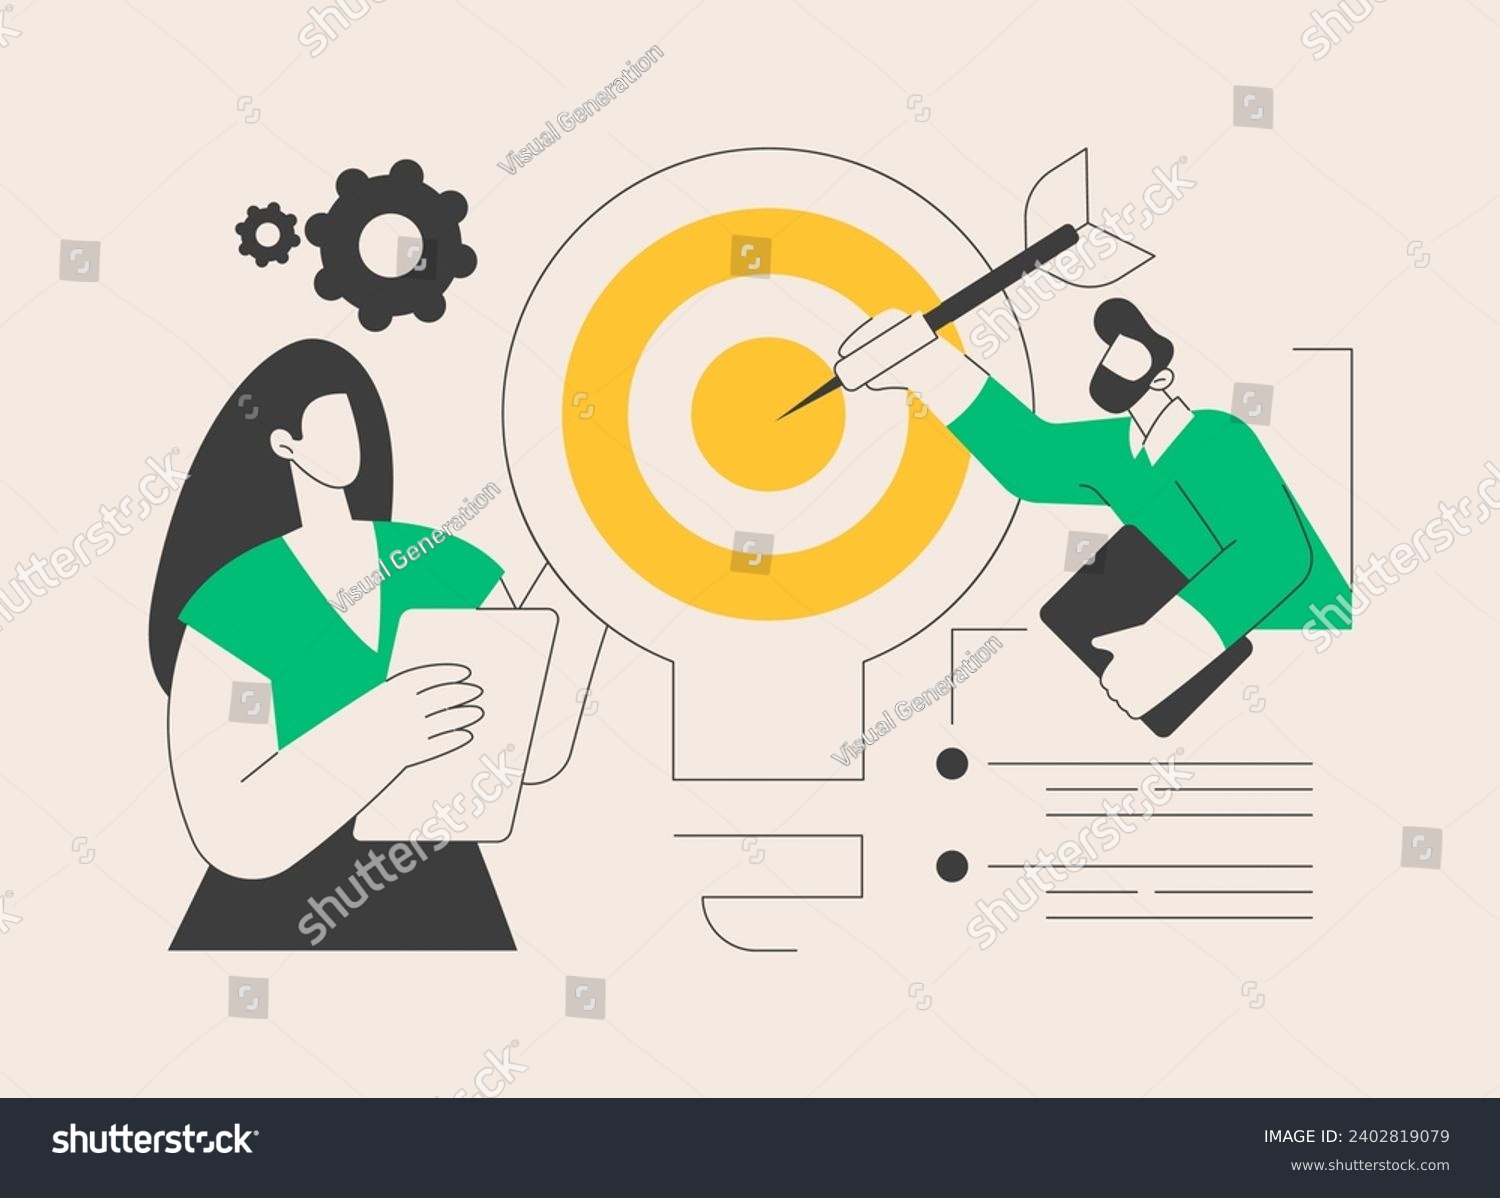 Goals abstract concept vector illustration. Business growth, strategic long-term planning, smart goals and objectives, setting mission, having purpose, future achievement abstract metaphor. #2402819079